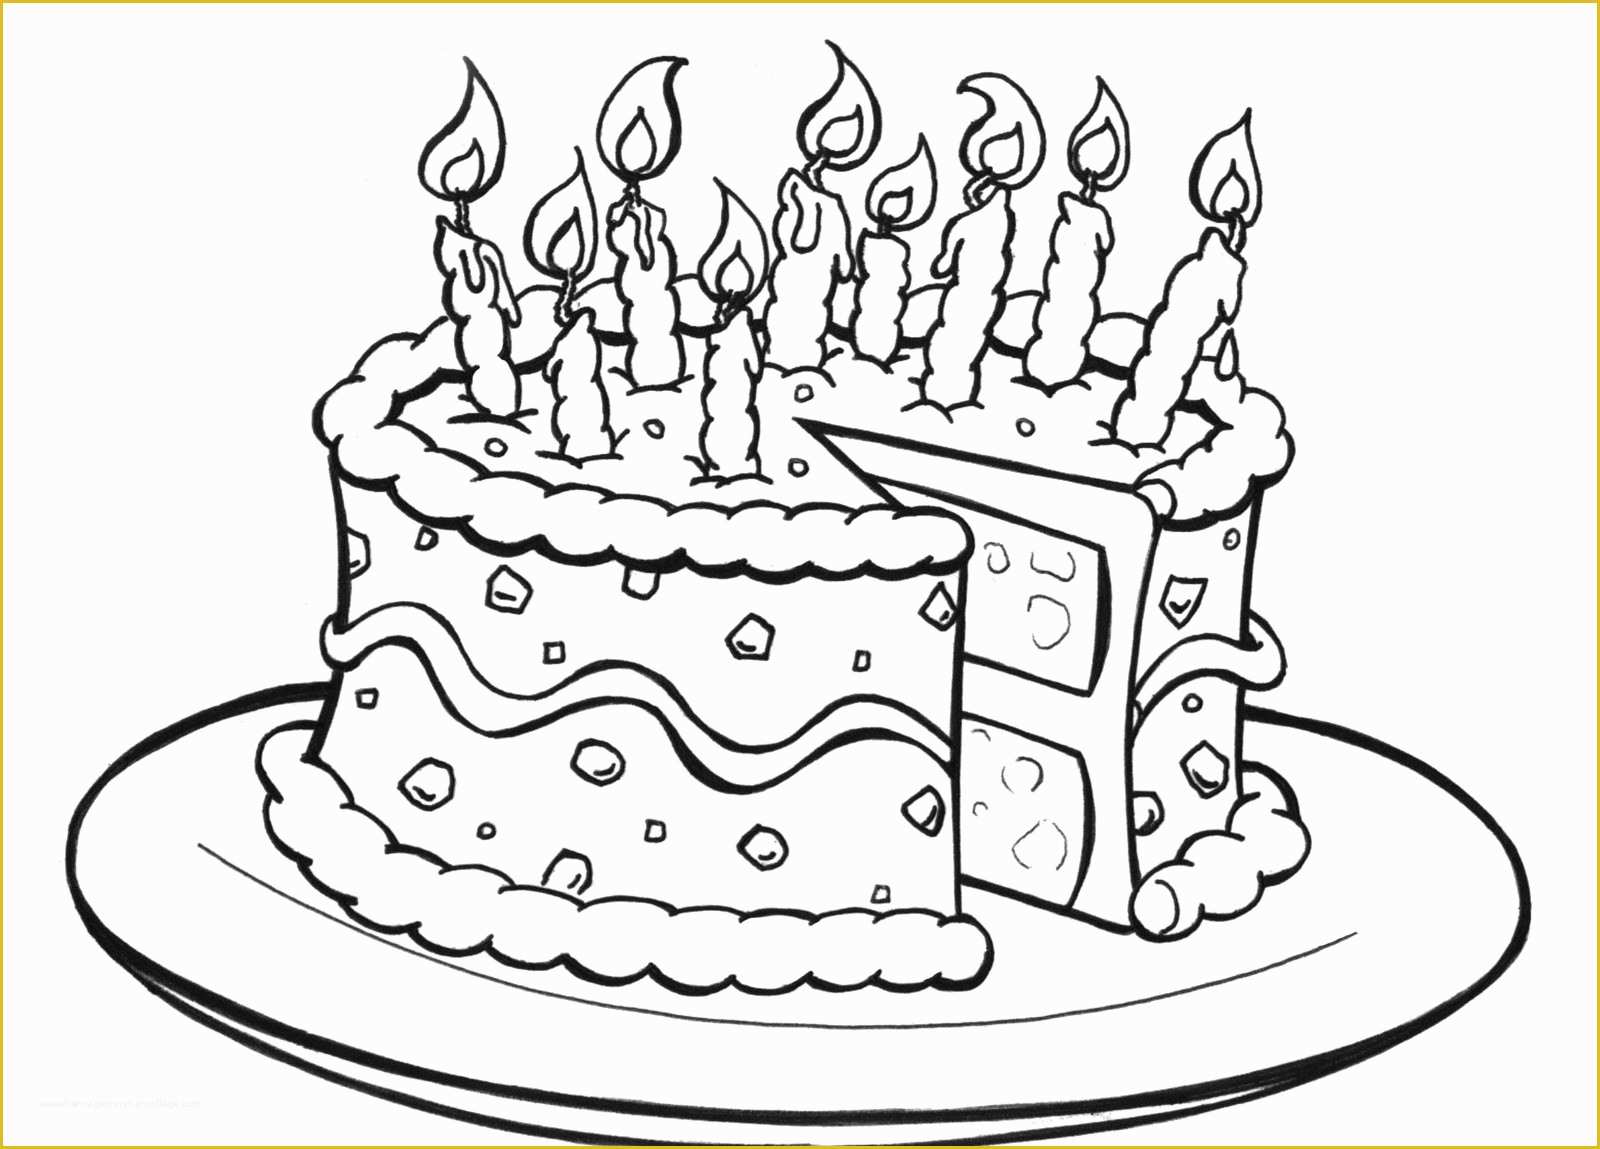 Free Printable Cake Templates Of Free Printable Birthday Cake Coloring Pages for Kids